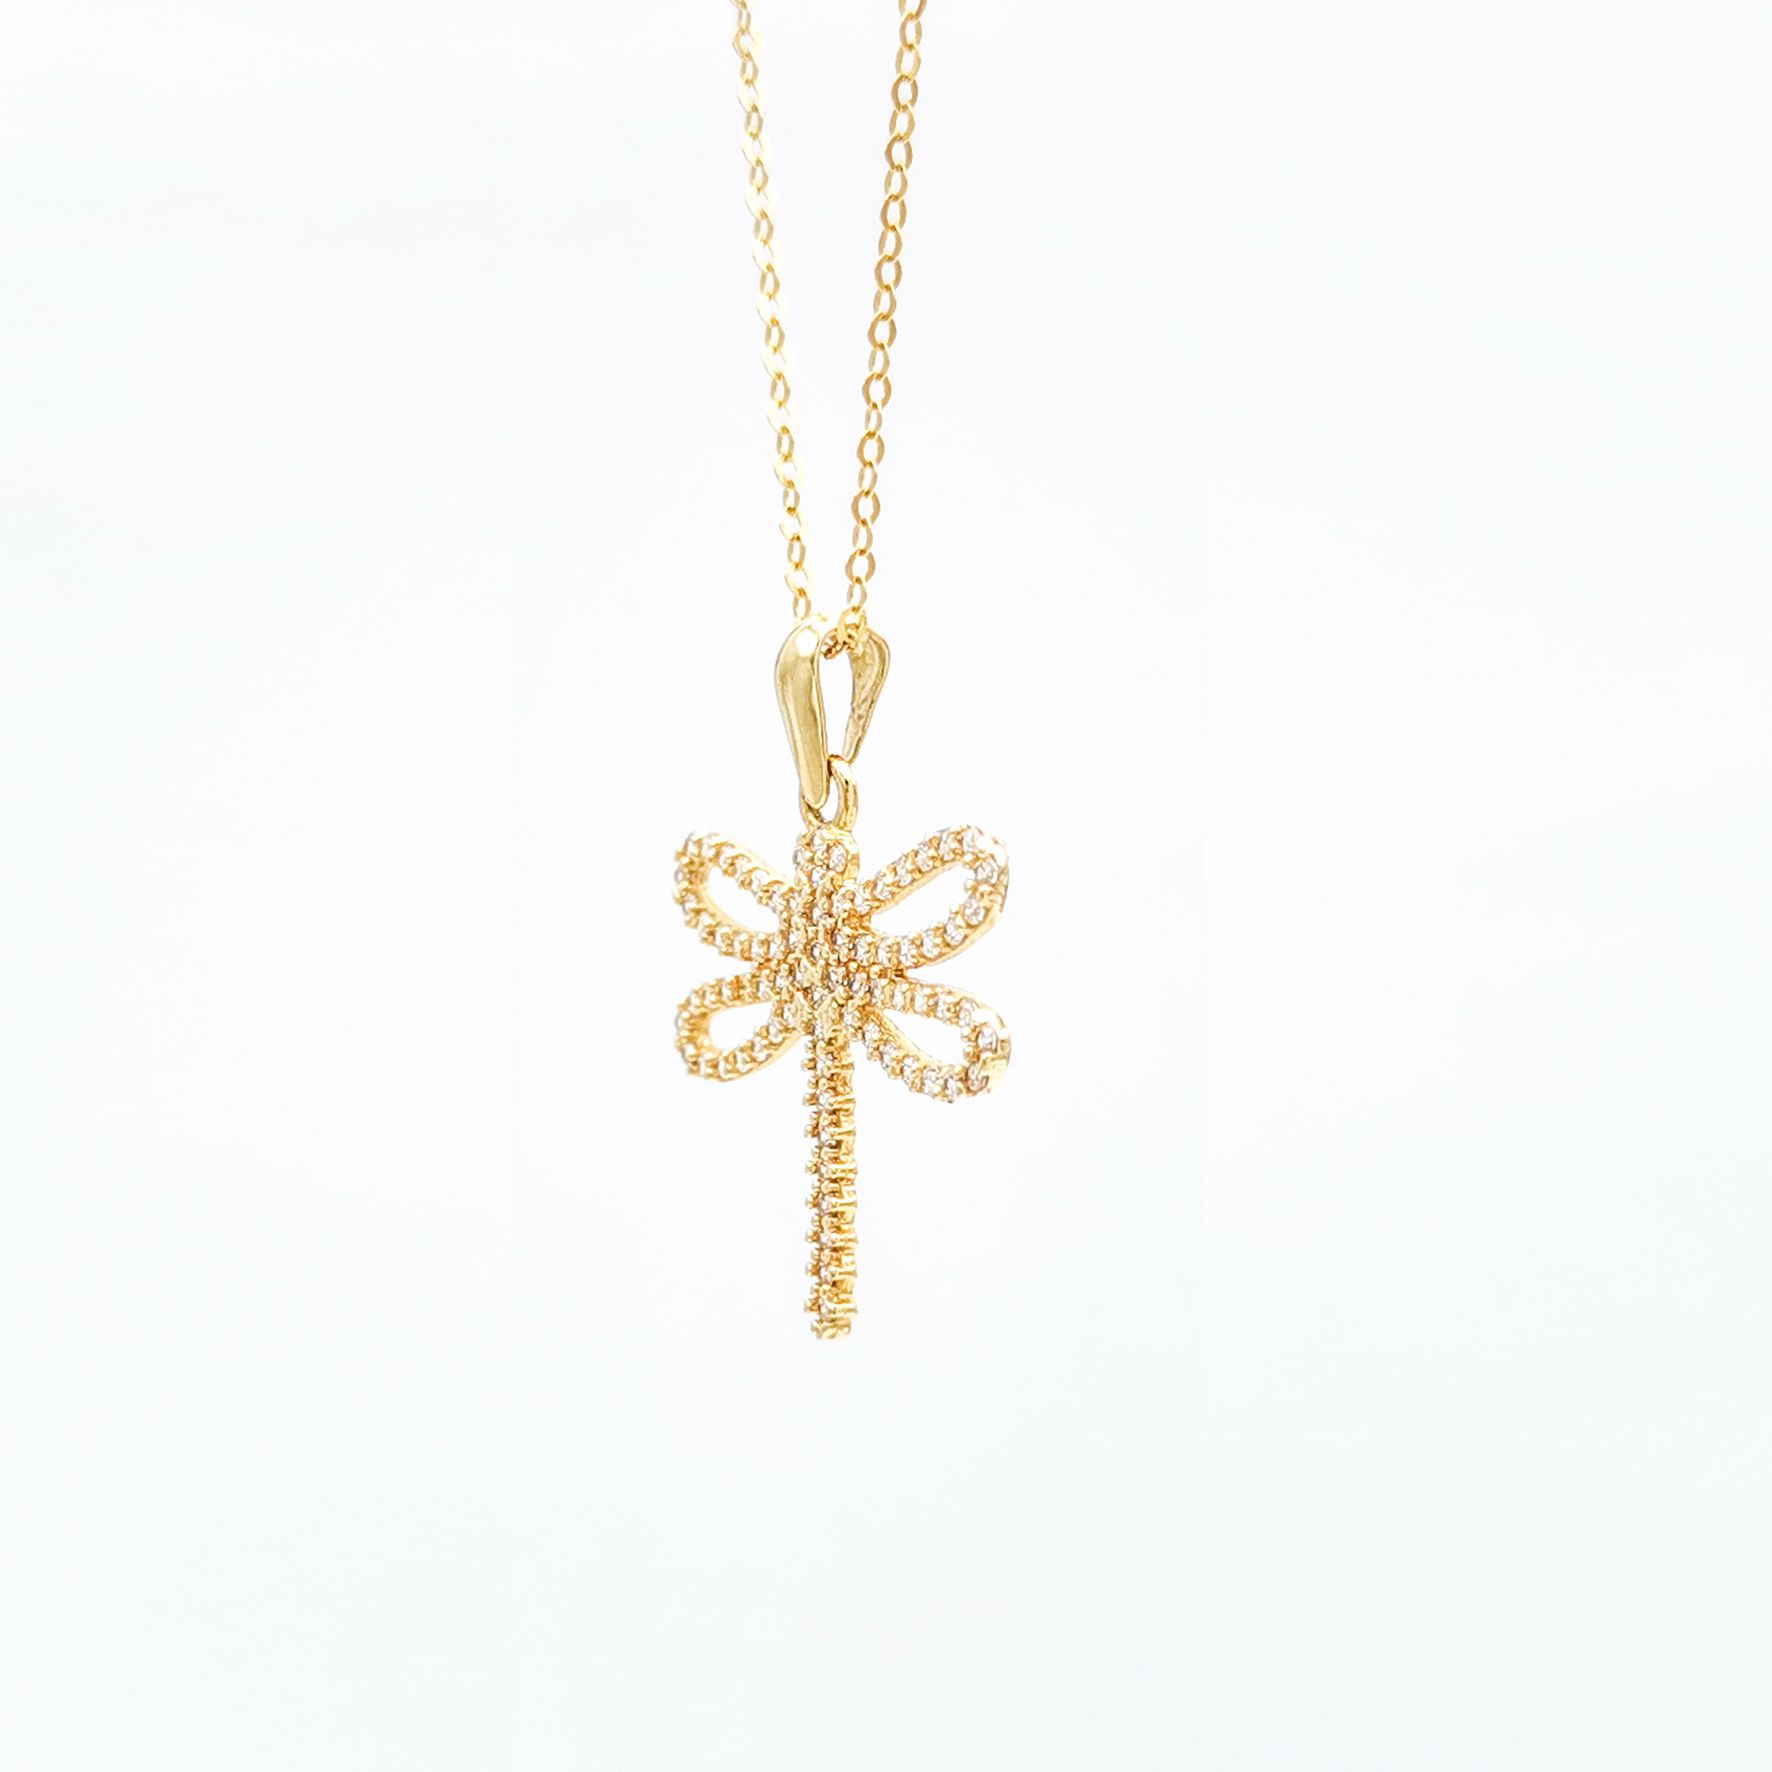 18K Yellow Gold Pendant with Chain [XP-#049]